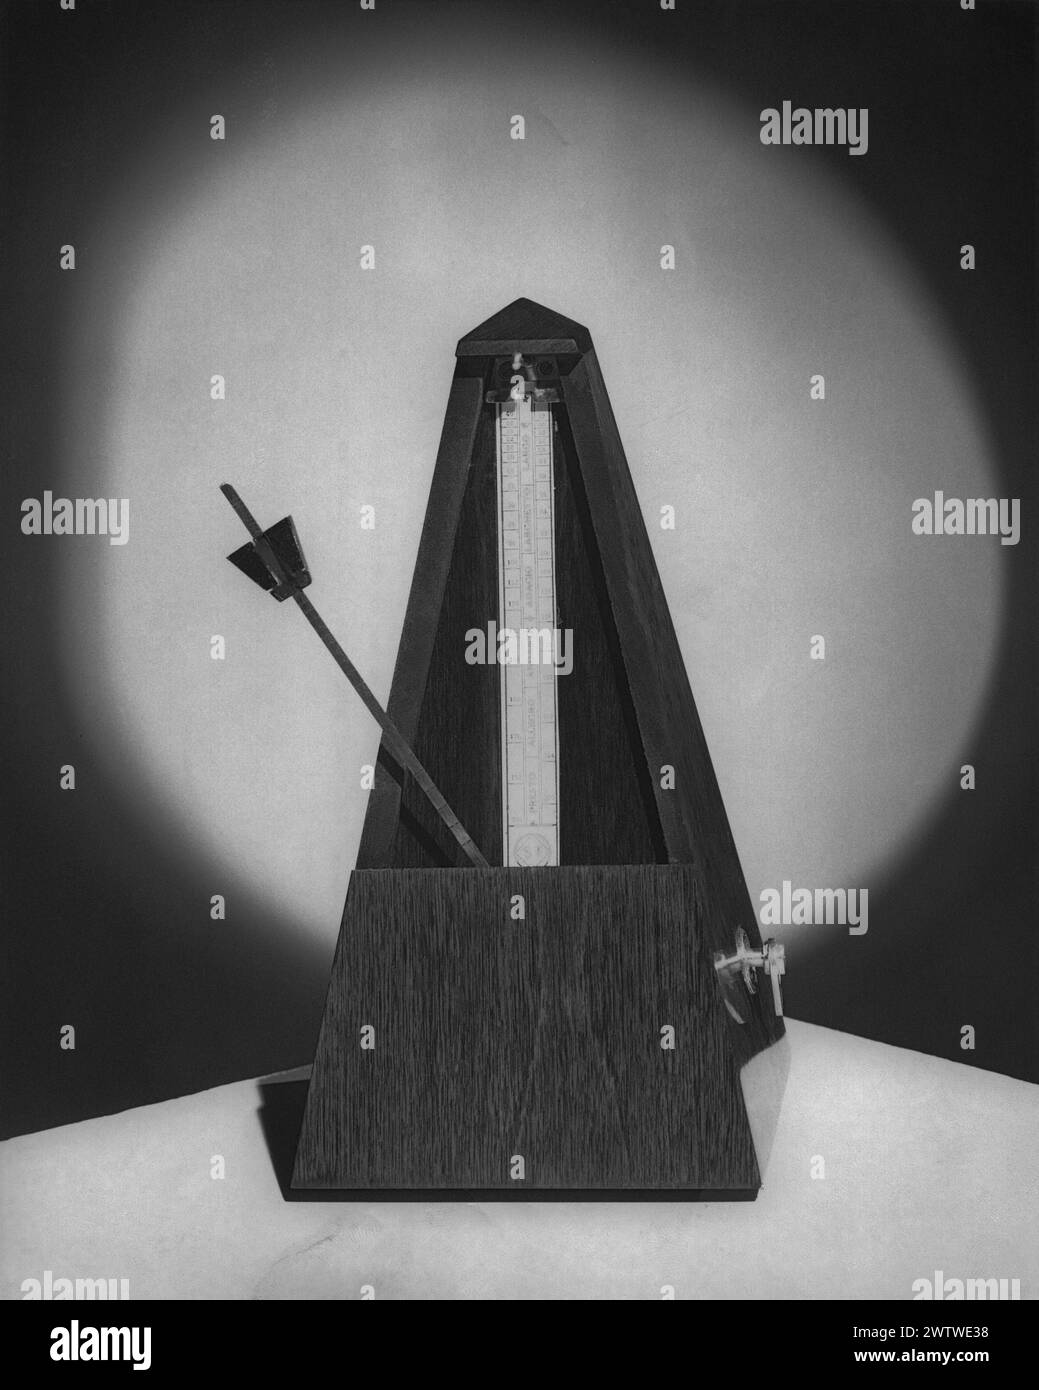 Dramatic image of an old-fashioned wooden metronome sitting on a table with around light shining on the background behind it Stock Photo